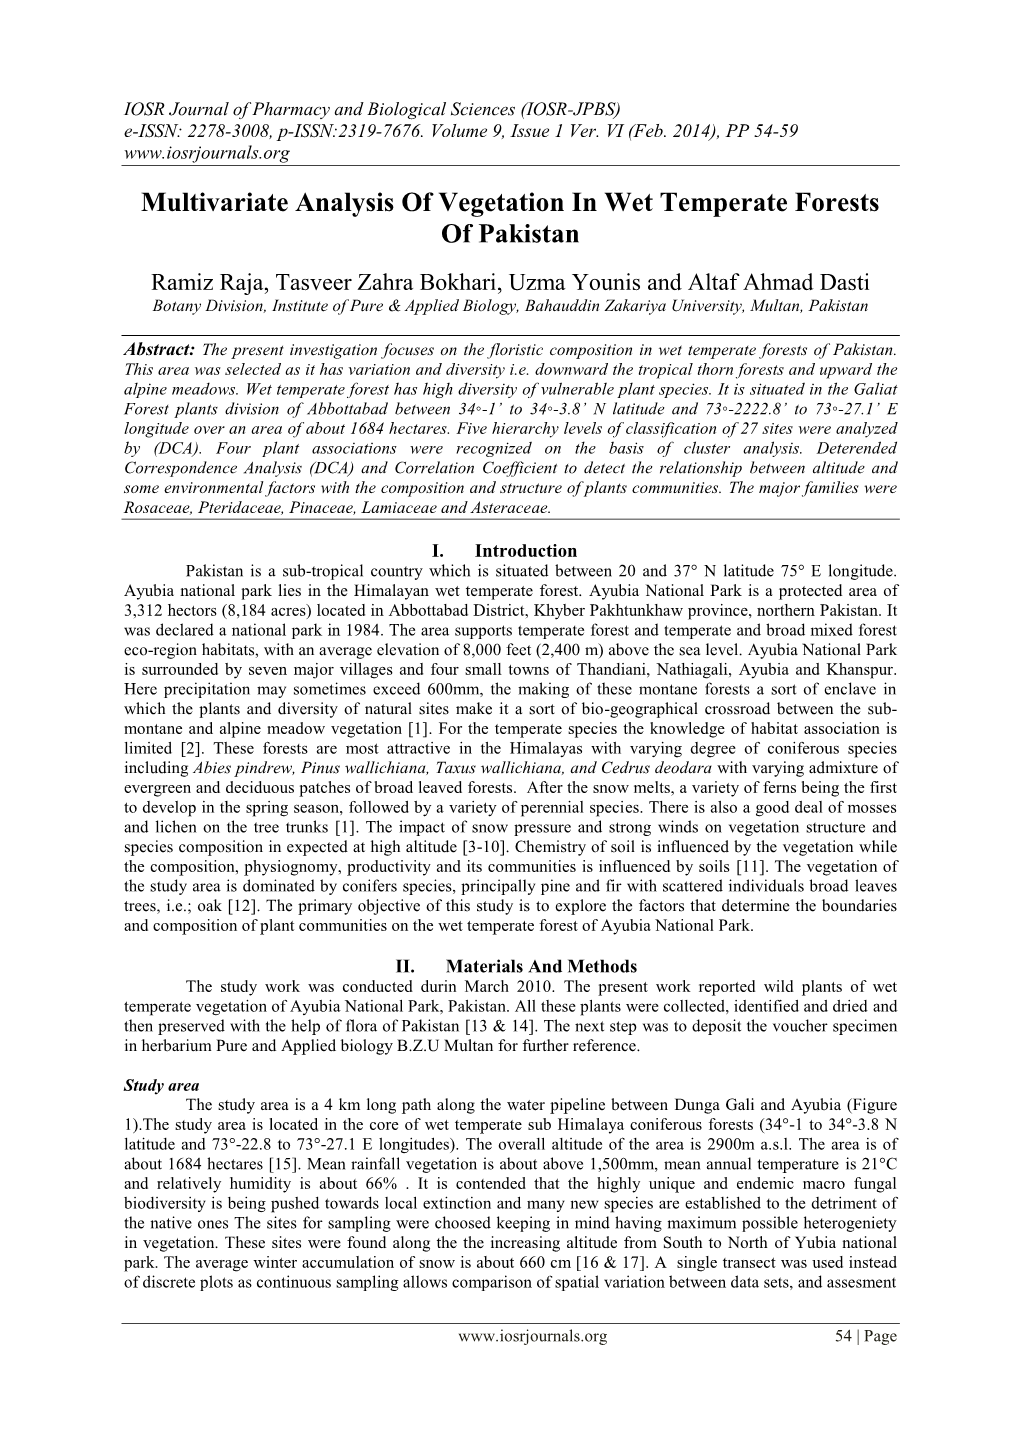 Multivariate Analysis of Vegetation in Wet Temperate Forests of Pakistan